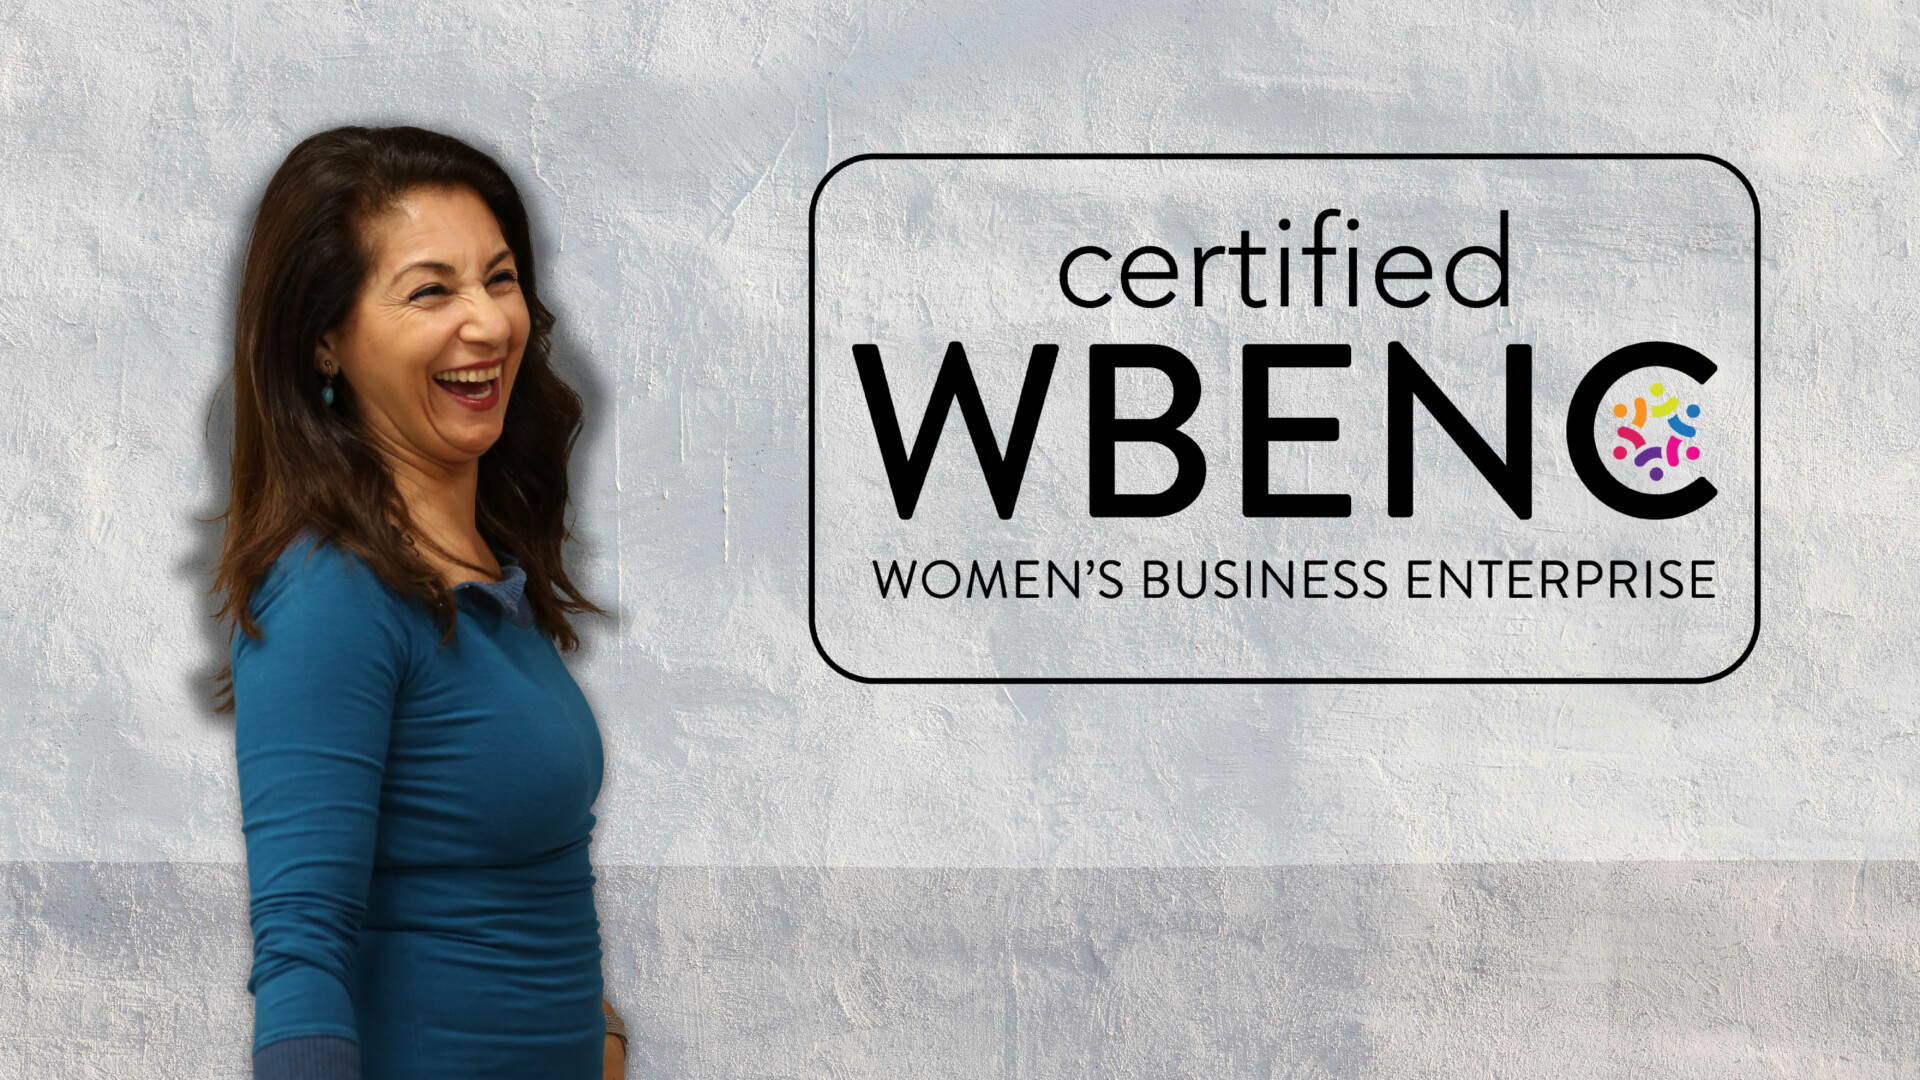 We Are Now WBENC Certified: Women Owned